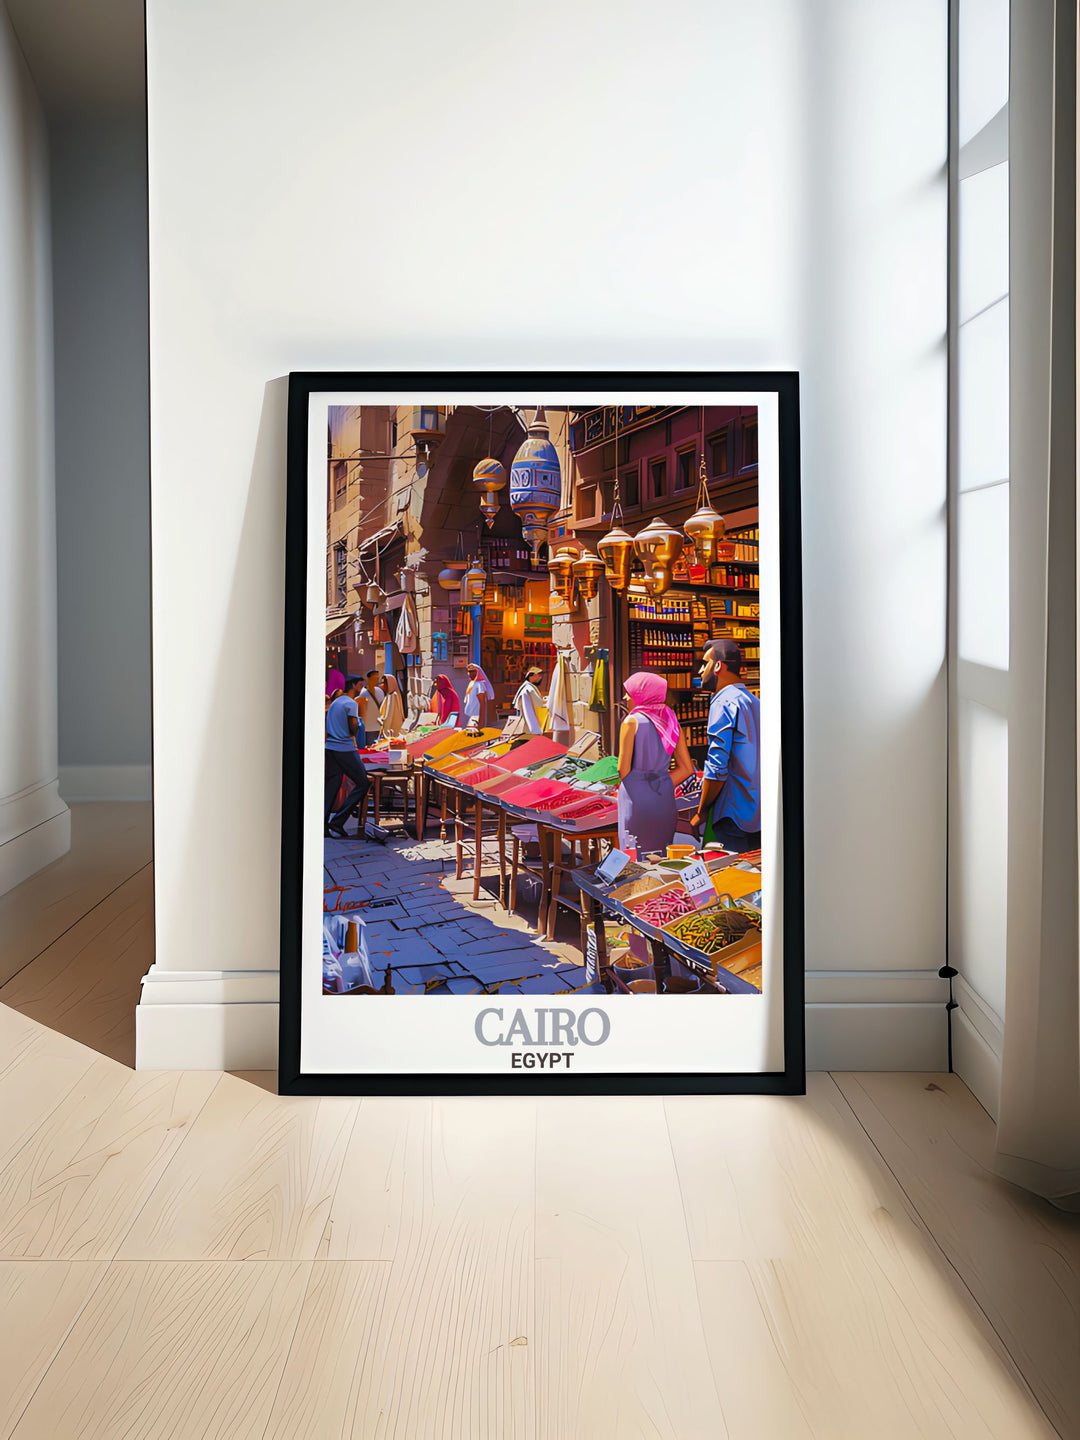 Discover the vibrant atmosphere of Cairo with this stunning Khan El Khalili Bazaar travel poster perfect for adding a touch of Egyptian charm to your home decor ideal for travel enthusiasts and lovers of vintage posters alike